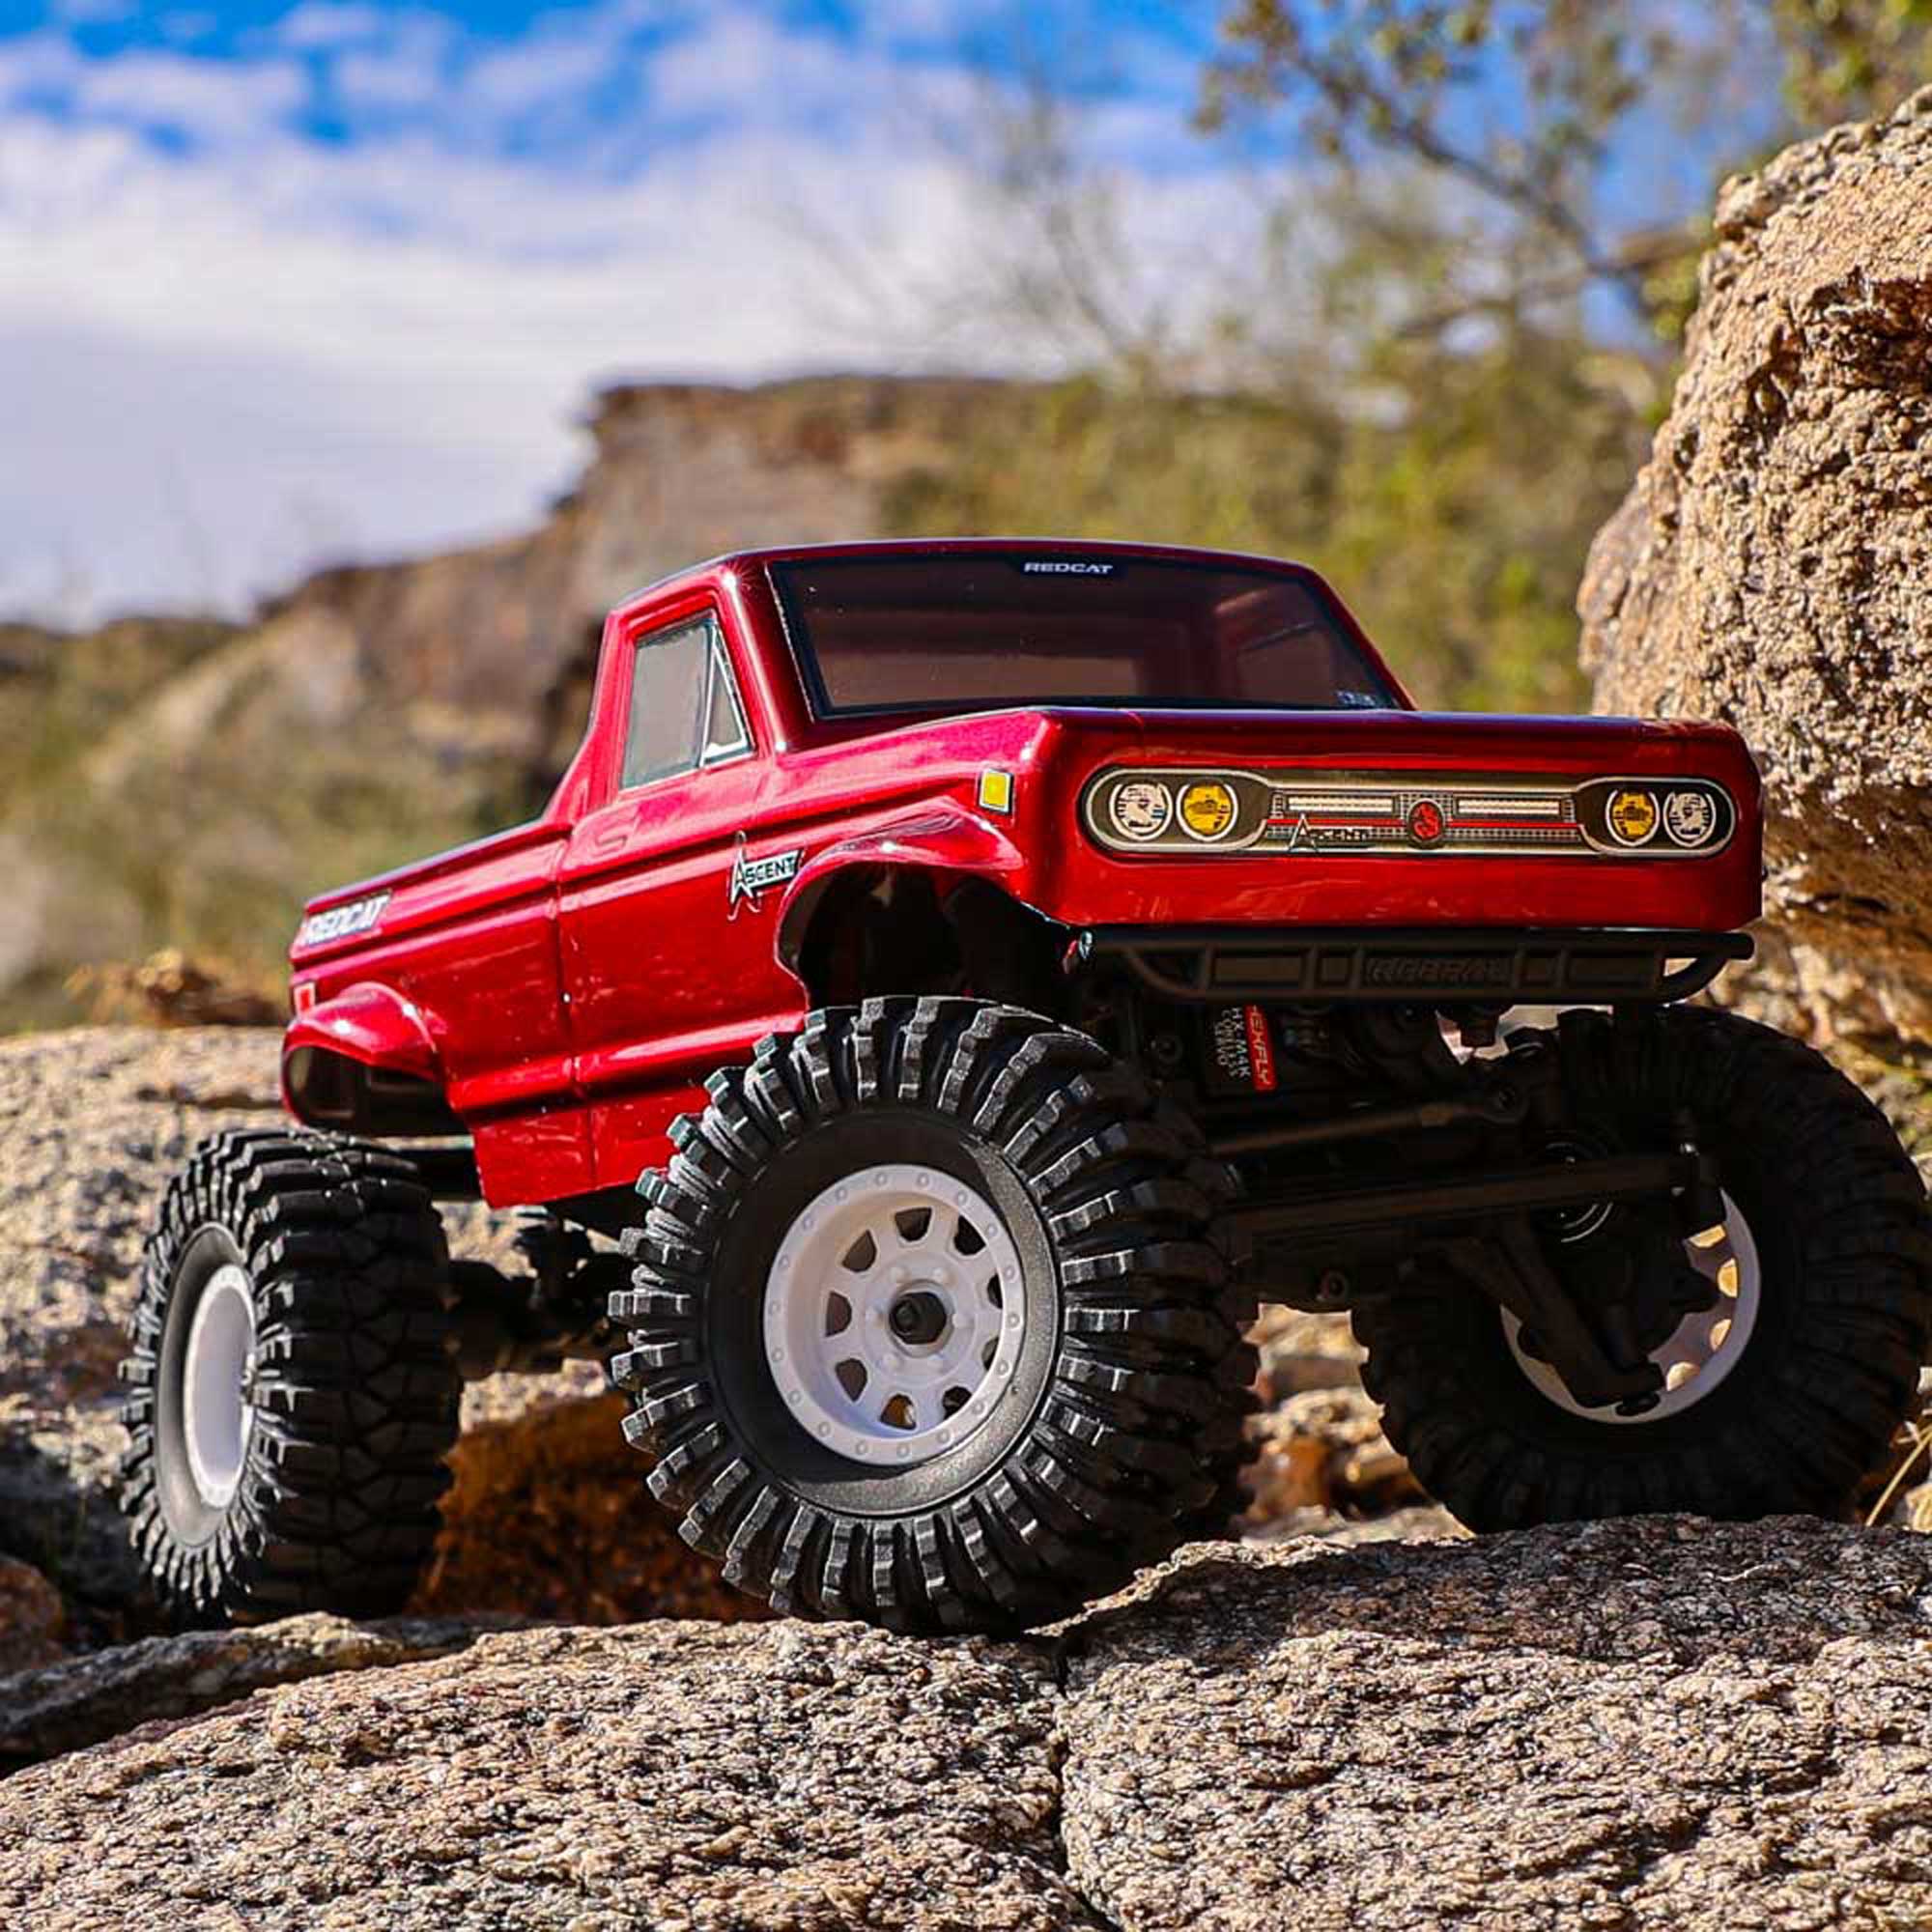 1/18 Ascent-18 4x4 Brushed Electric Rock Crawler RTR, Red